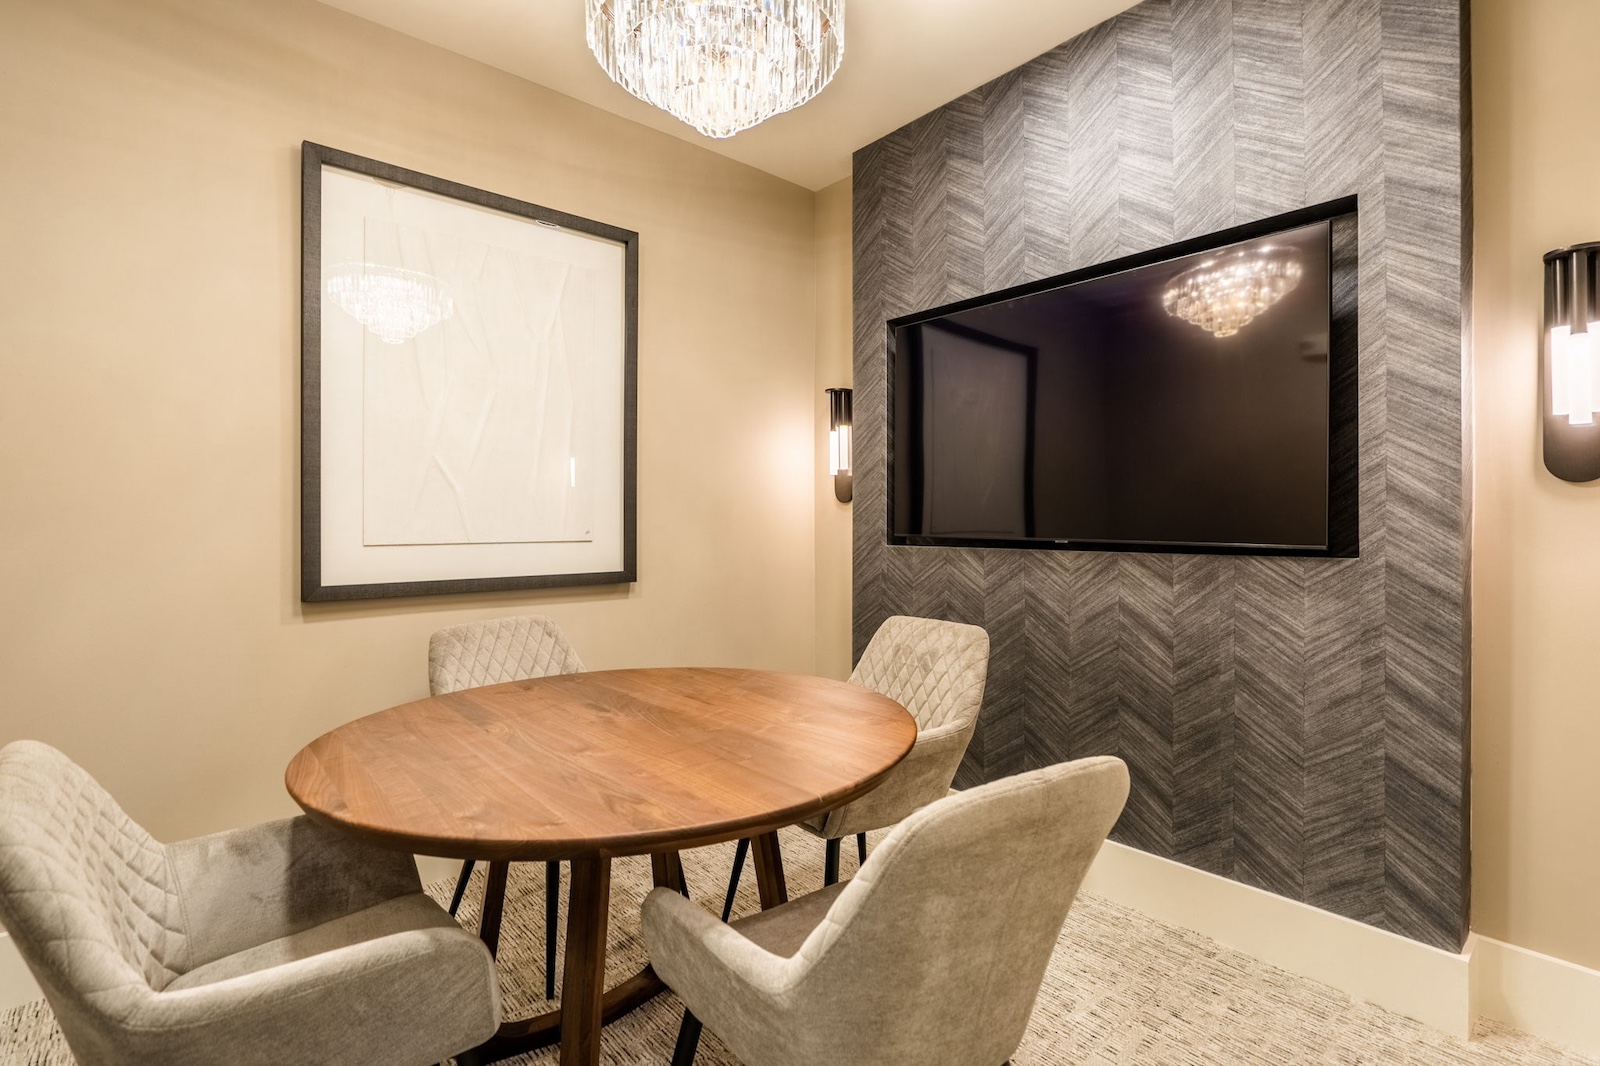 Work-Well space with television at our apartments for rent in Cypress, TX. Amenities